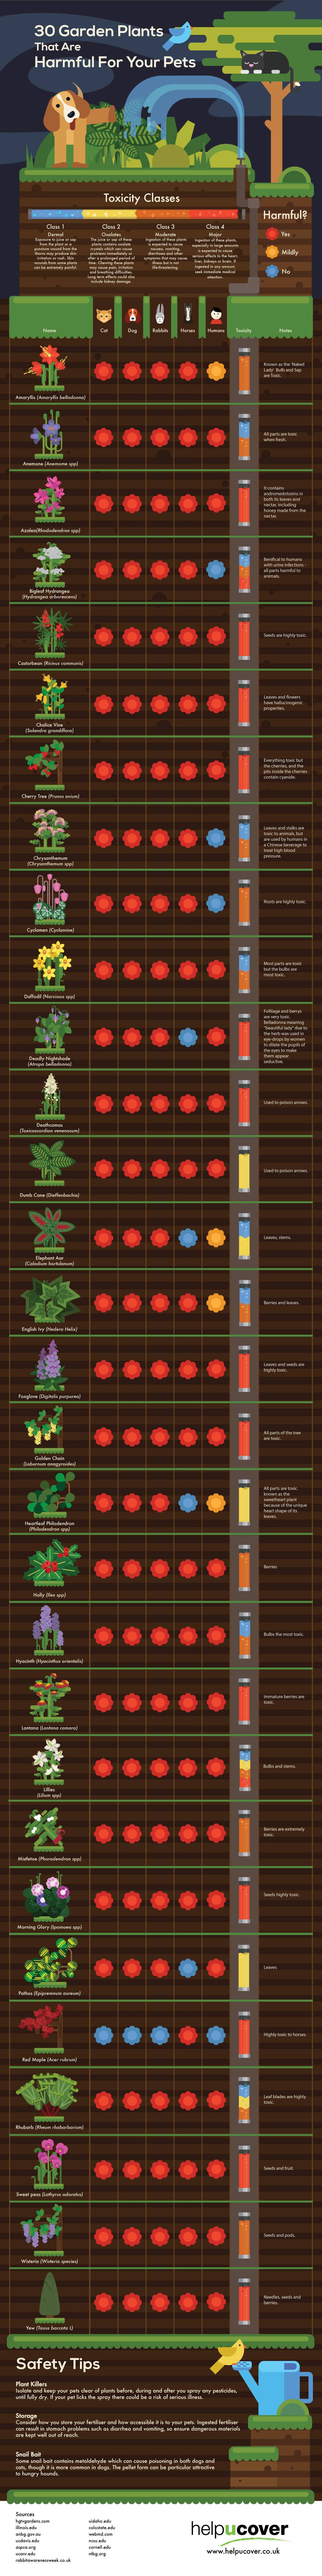 Plants that are harmful for your pets